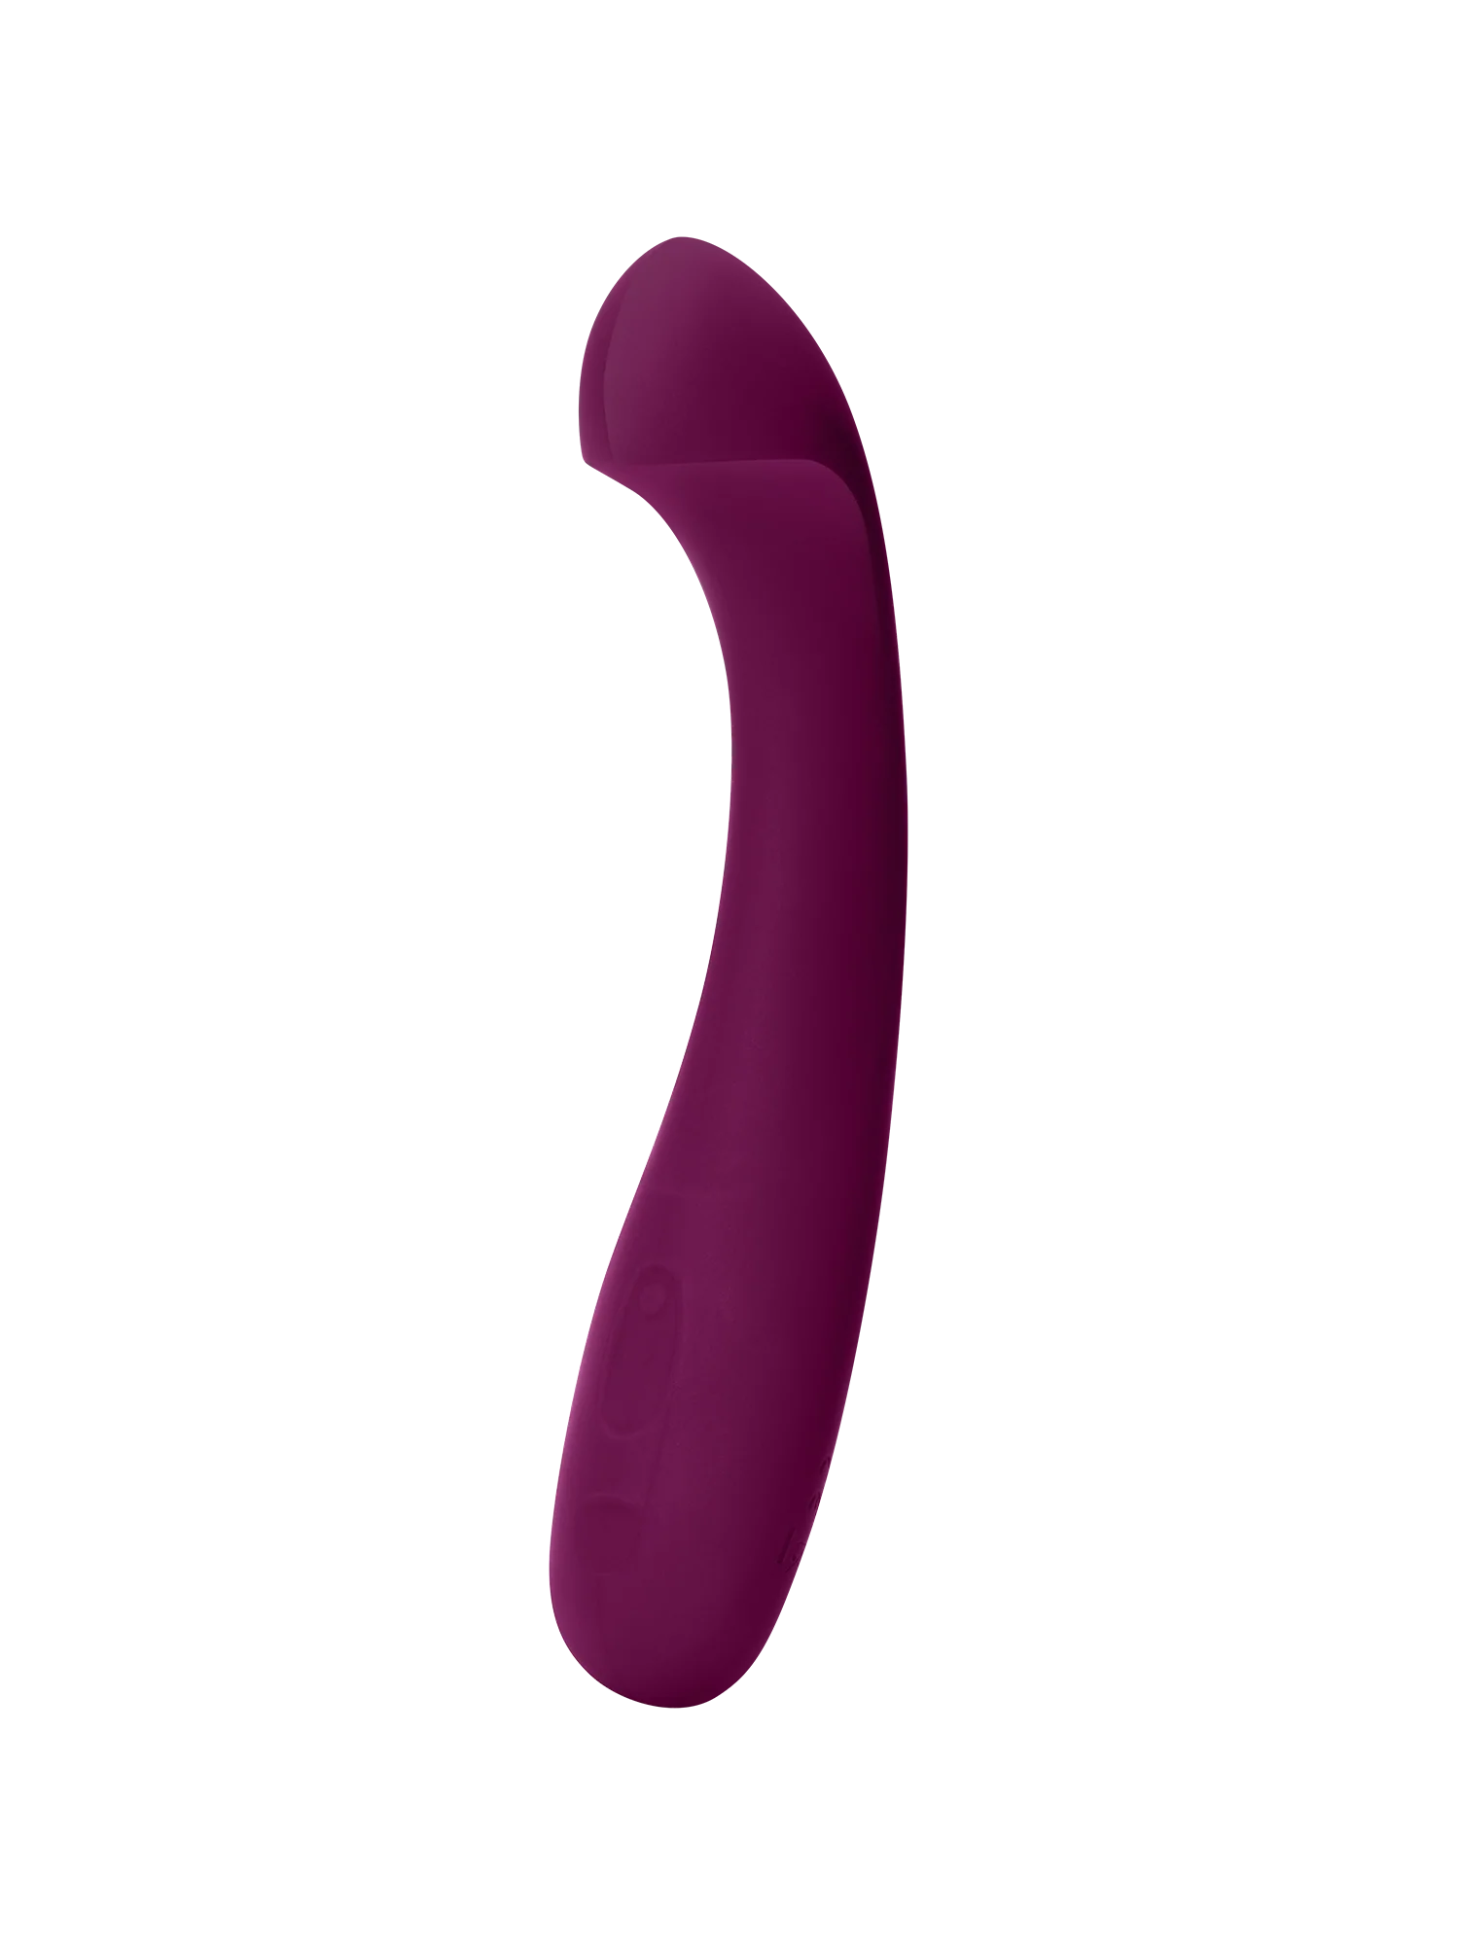 dame arc vibrator, the best dame sex toy for g-spot stimulation